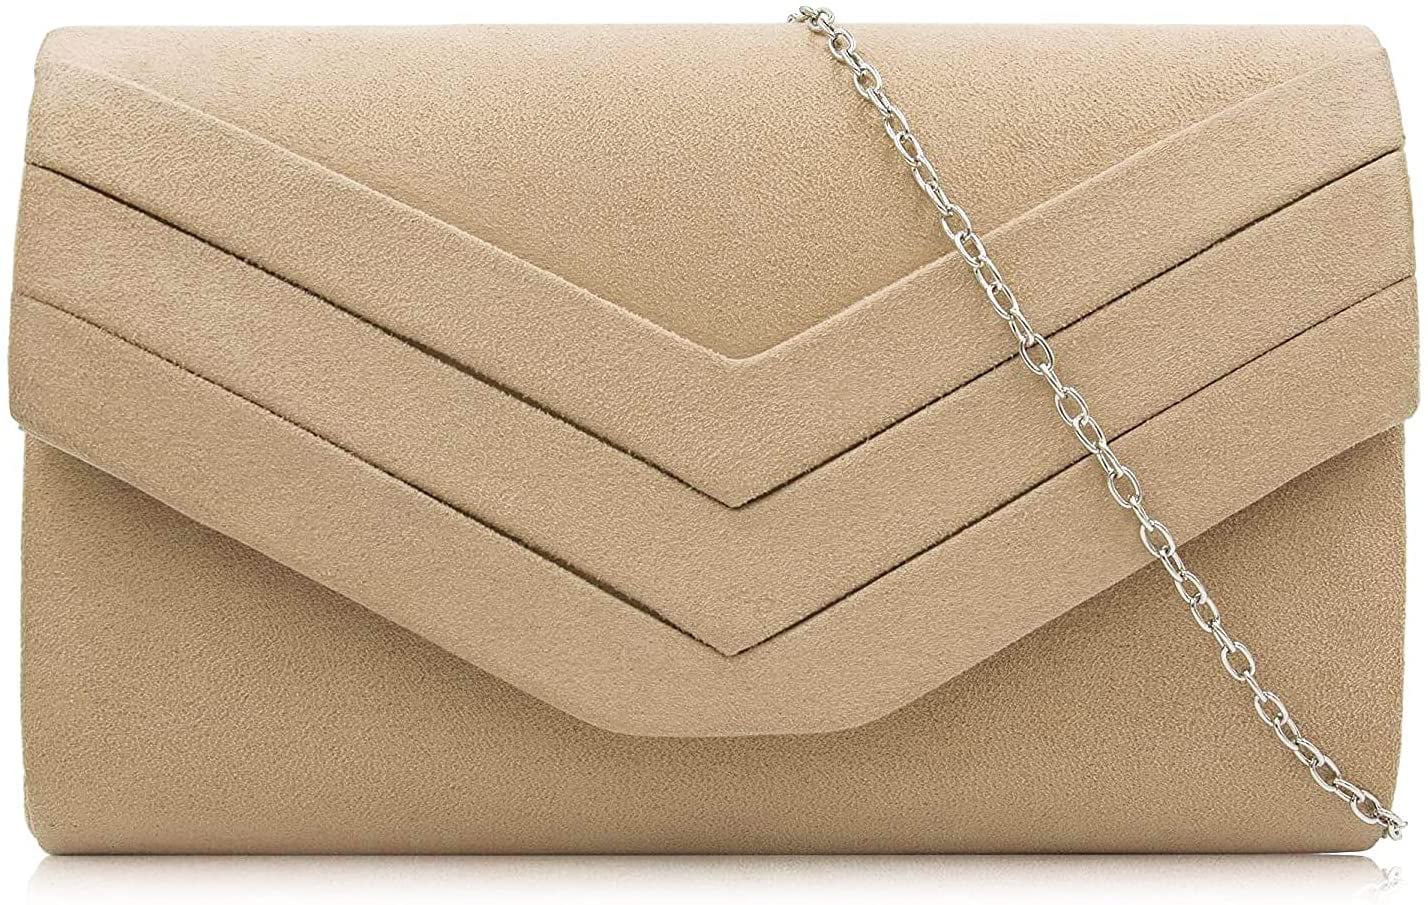 Women Patent Leather Envelope Ladies Evening Party Smart Pink Nude Clutch Bag 